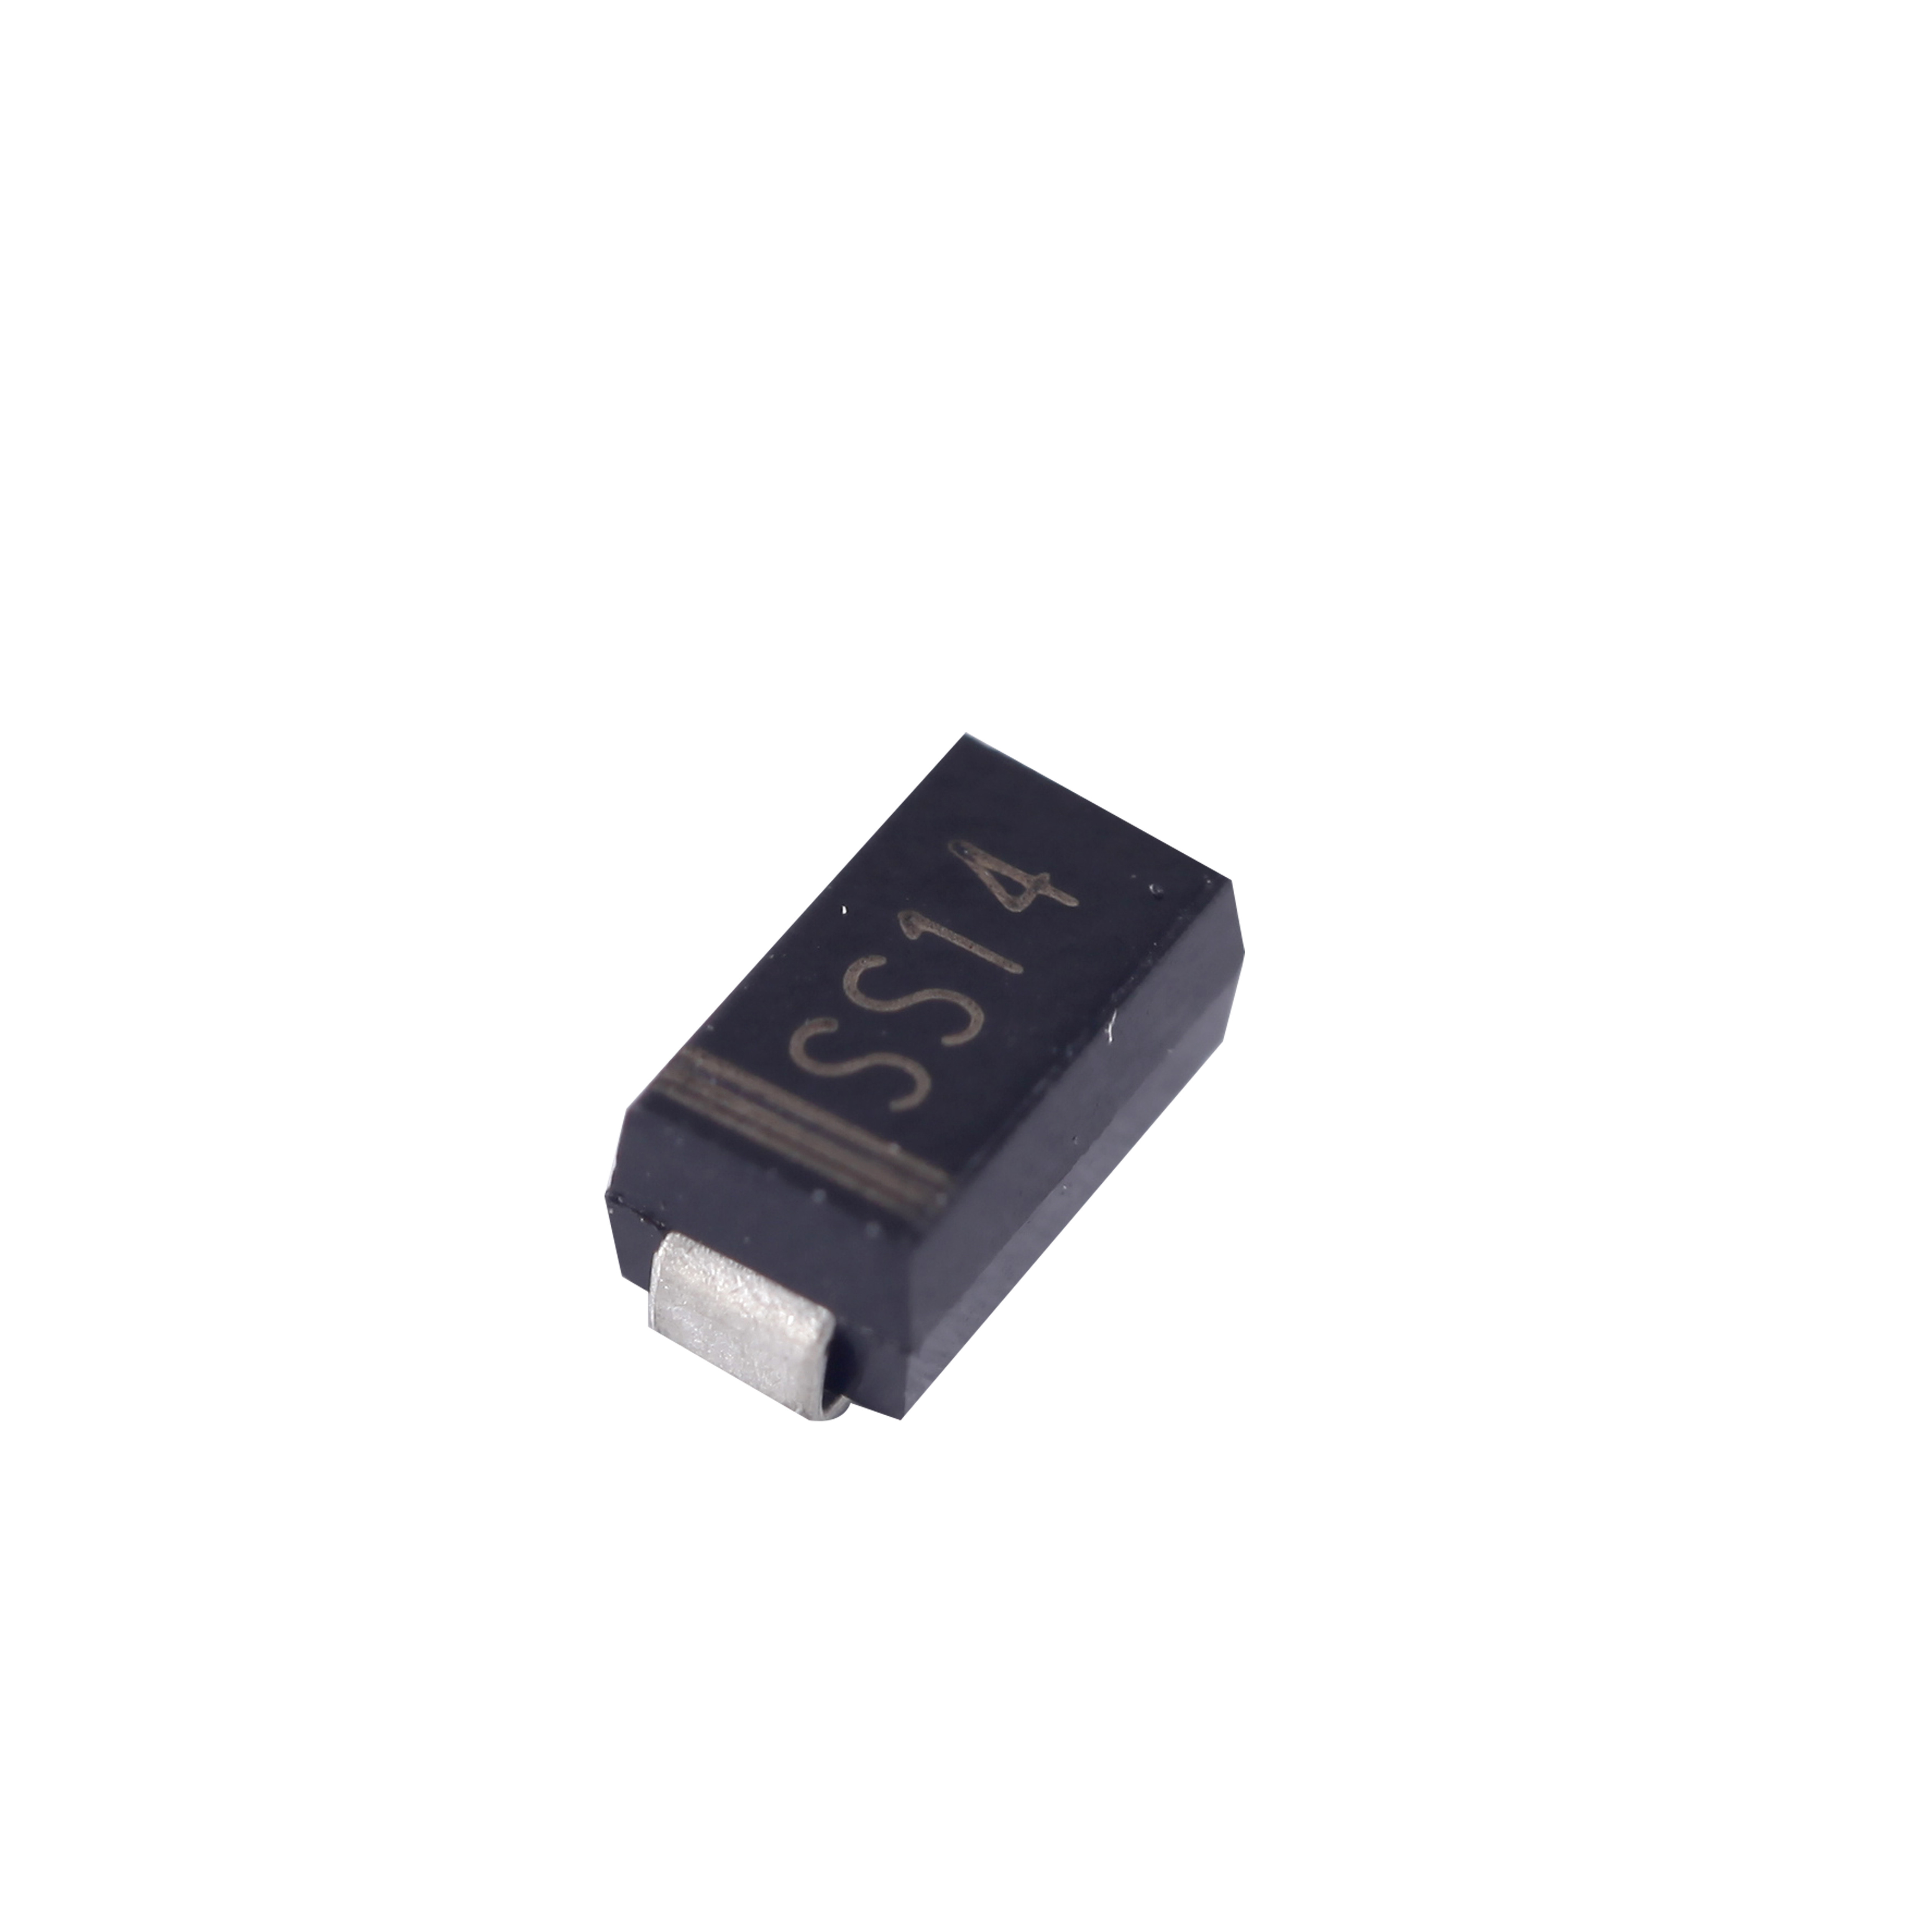 Quality SS14 1.0A 40V Surface Mount Rectifier Diode , SMD Type 1N5819 Schottky Diode for sale